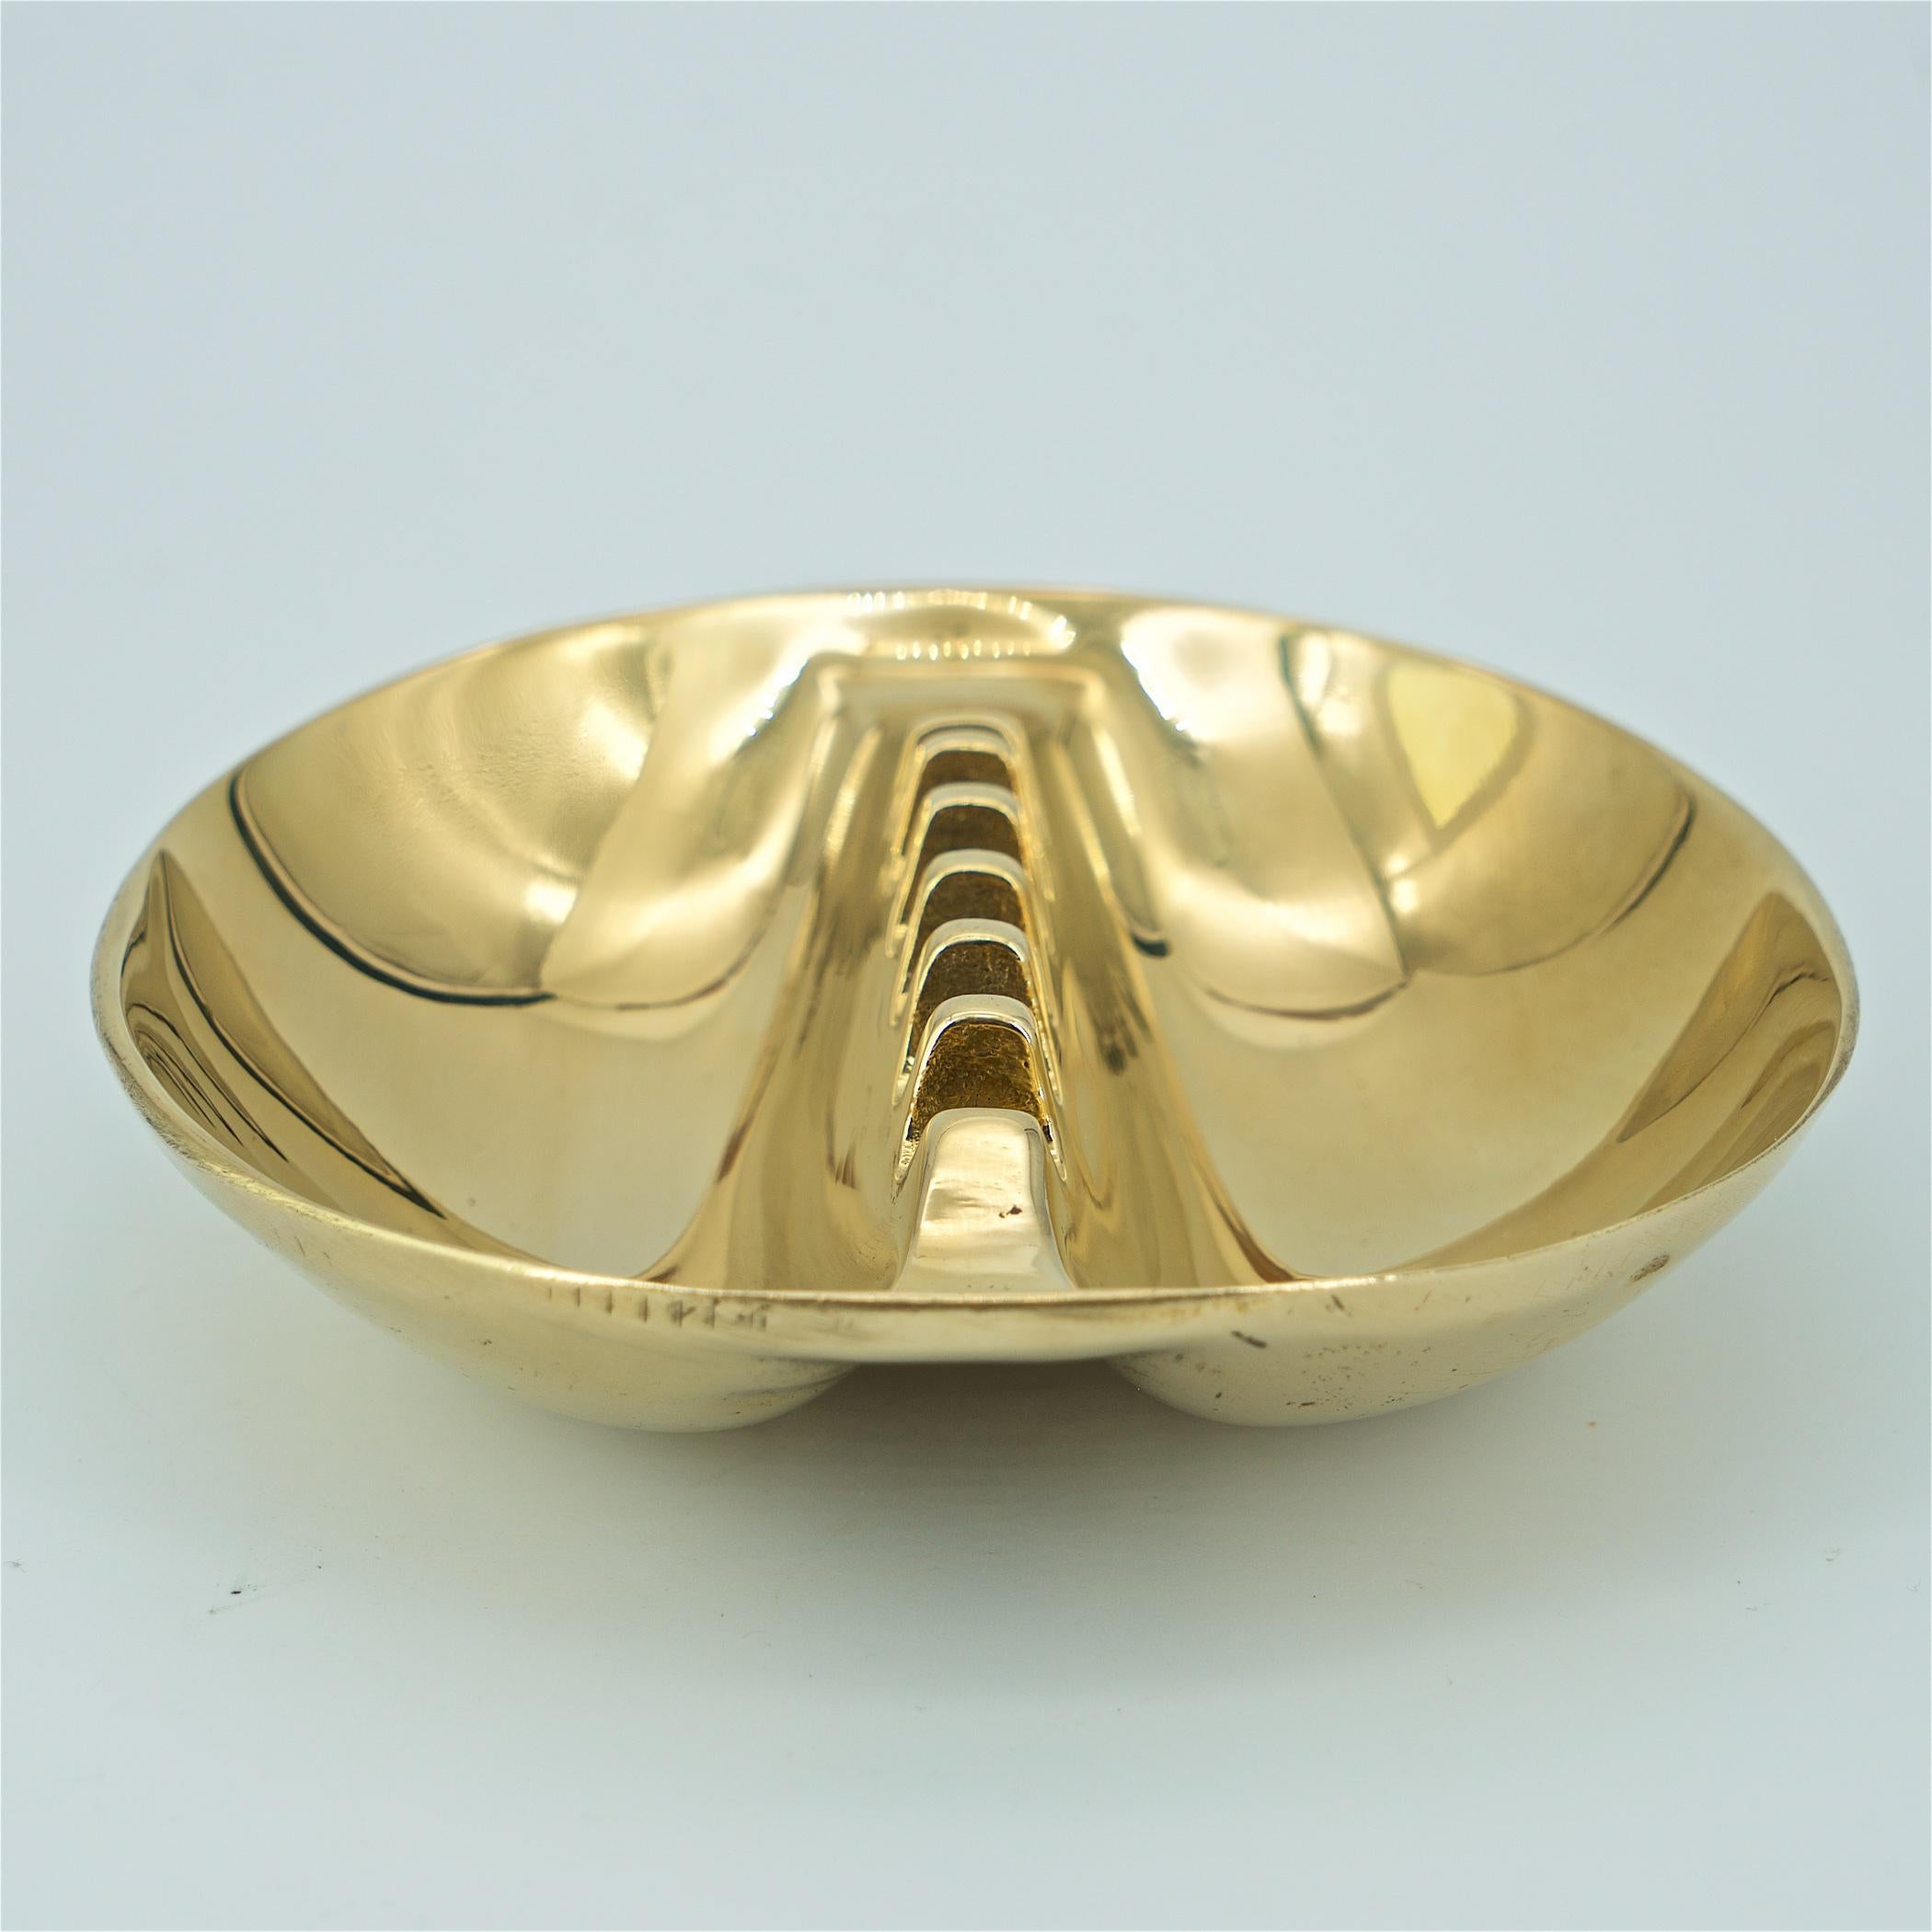 Mid-Century Modern 1970s Polished Gold Tone Ashtray Table Sculpture Mid-Century American Design